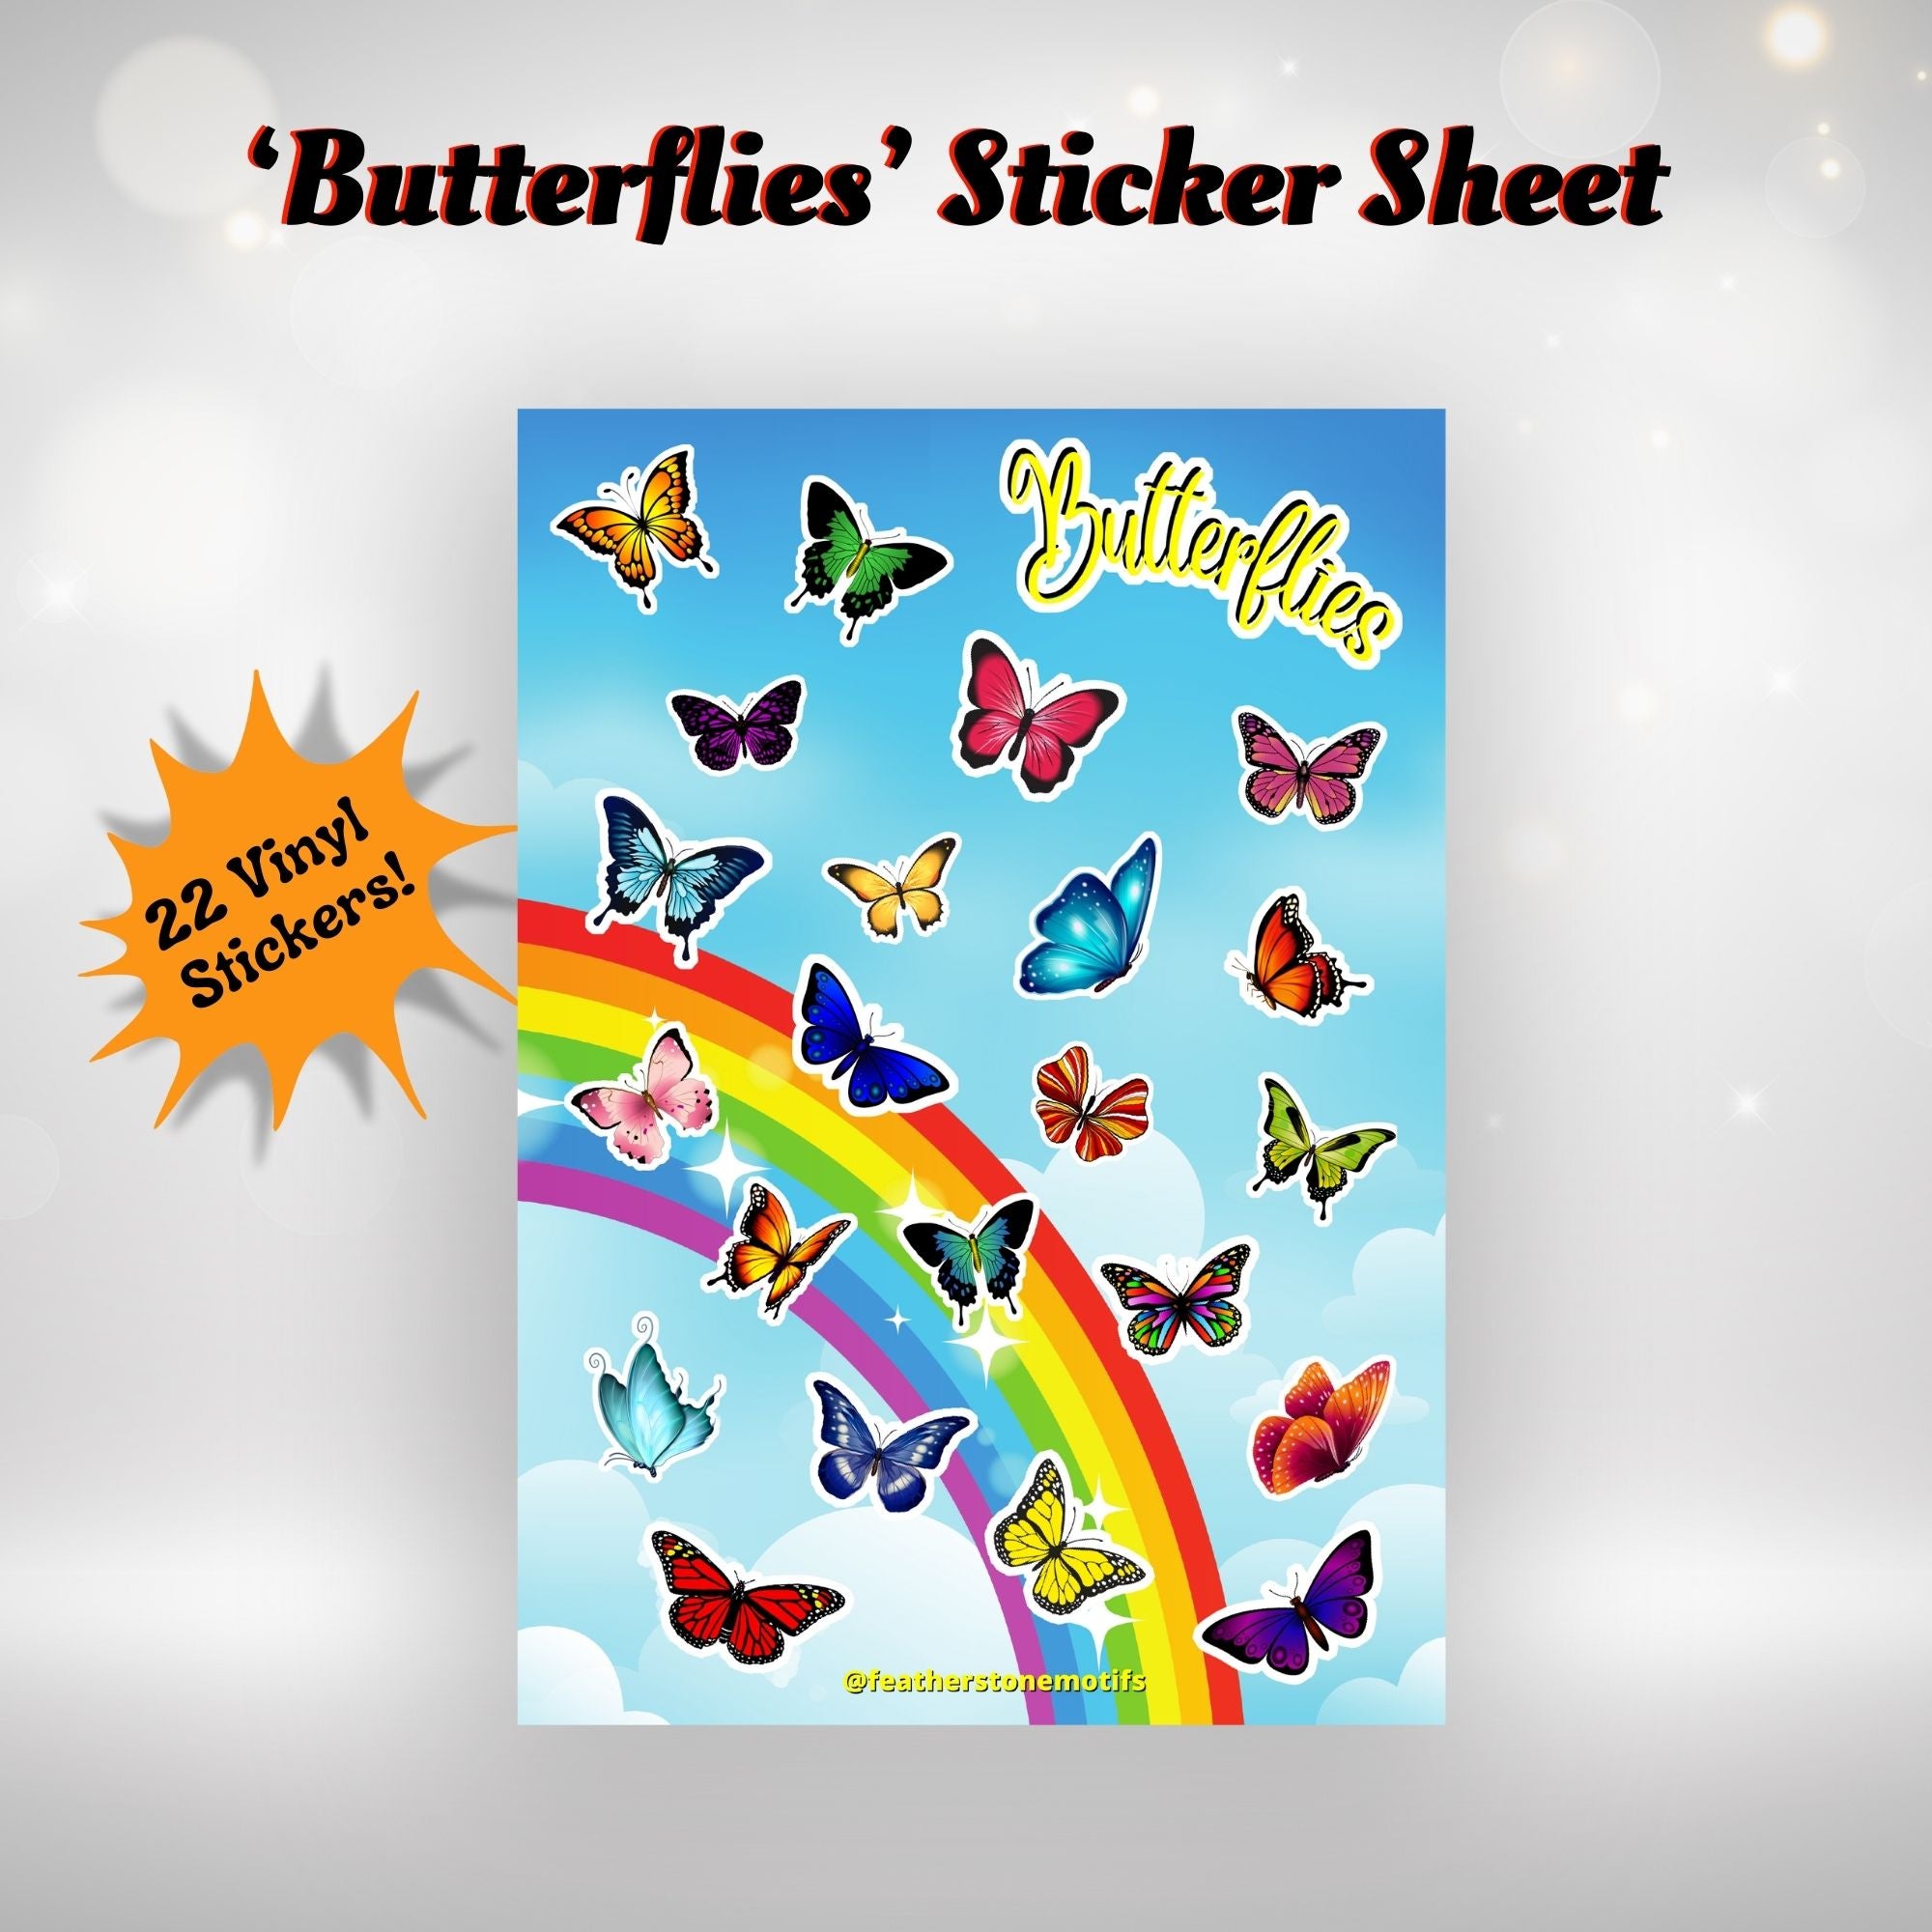 This image shows the Butterflies sticker sheet with 22 vinyl stickers that is included with the Butterfly themed Camp Postcard Kit.